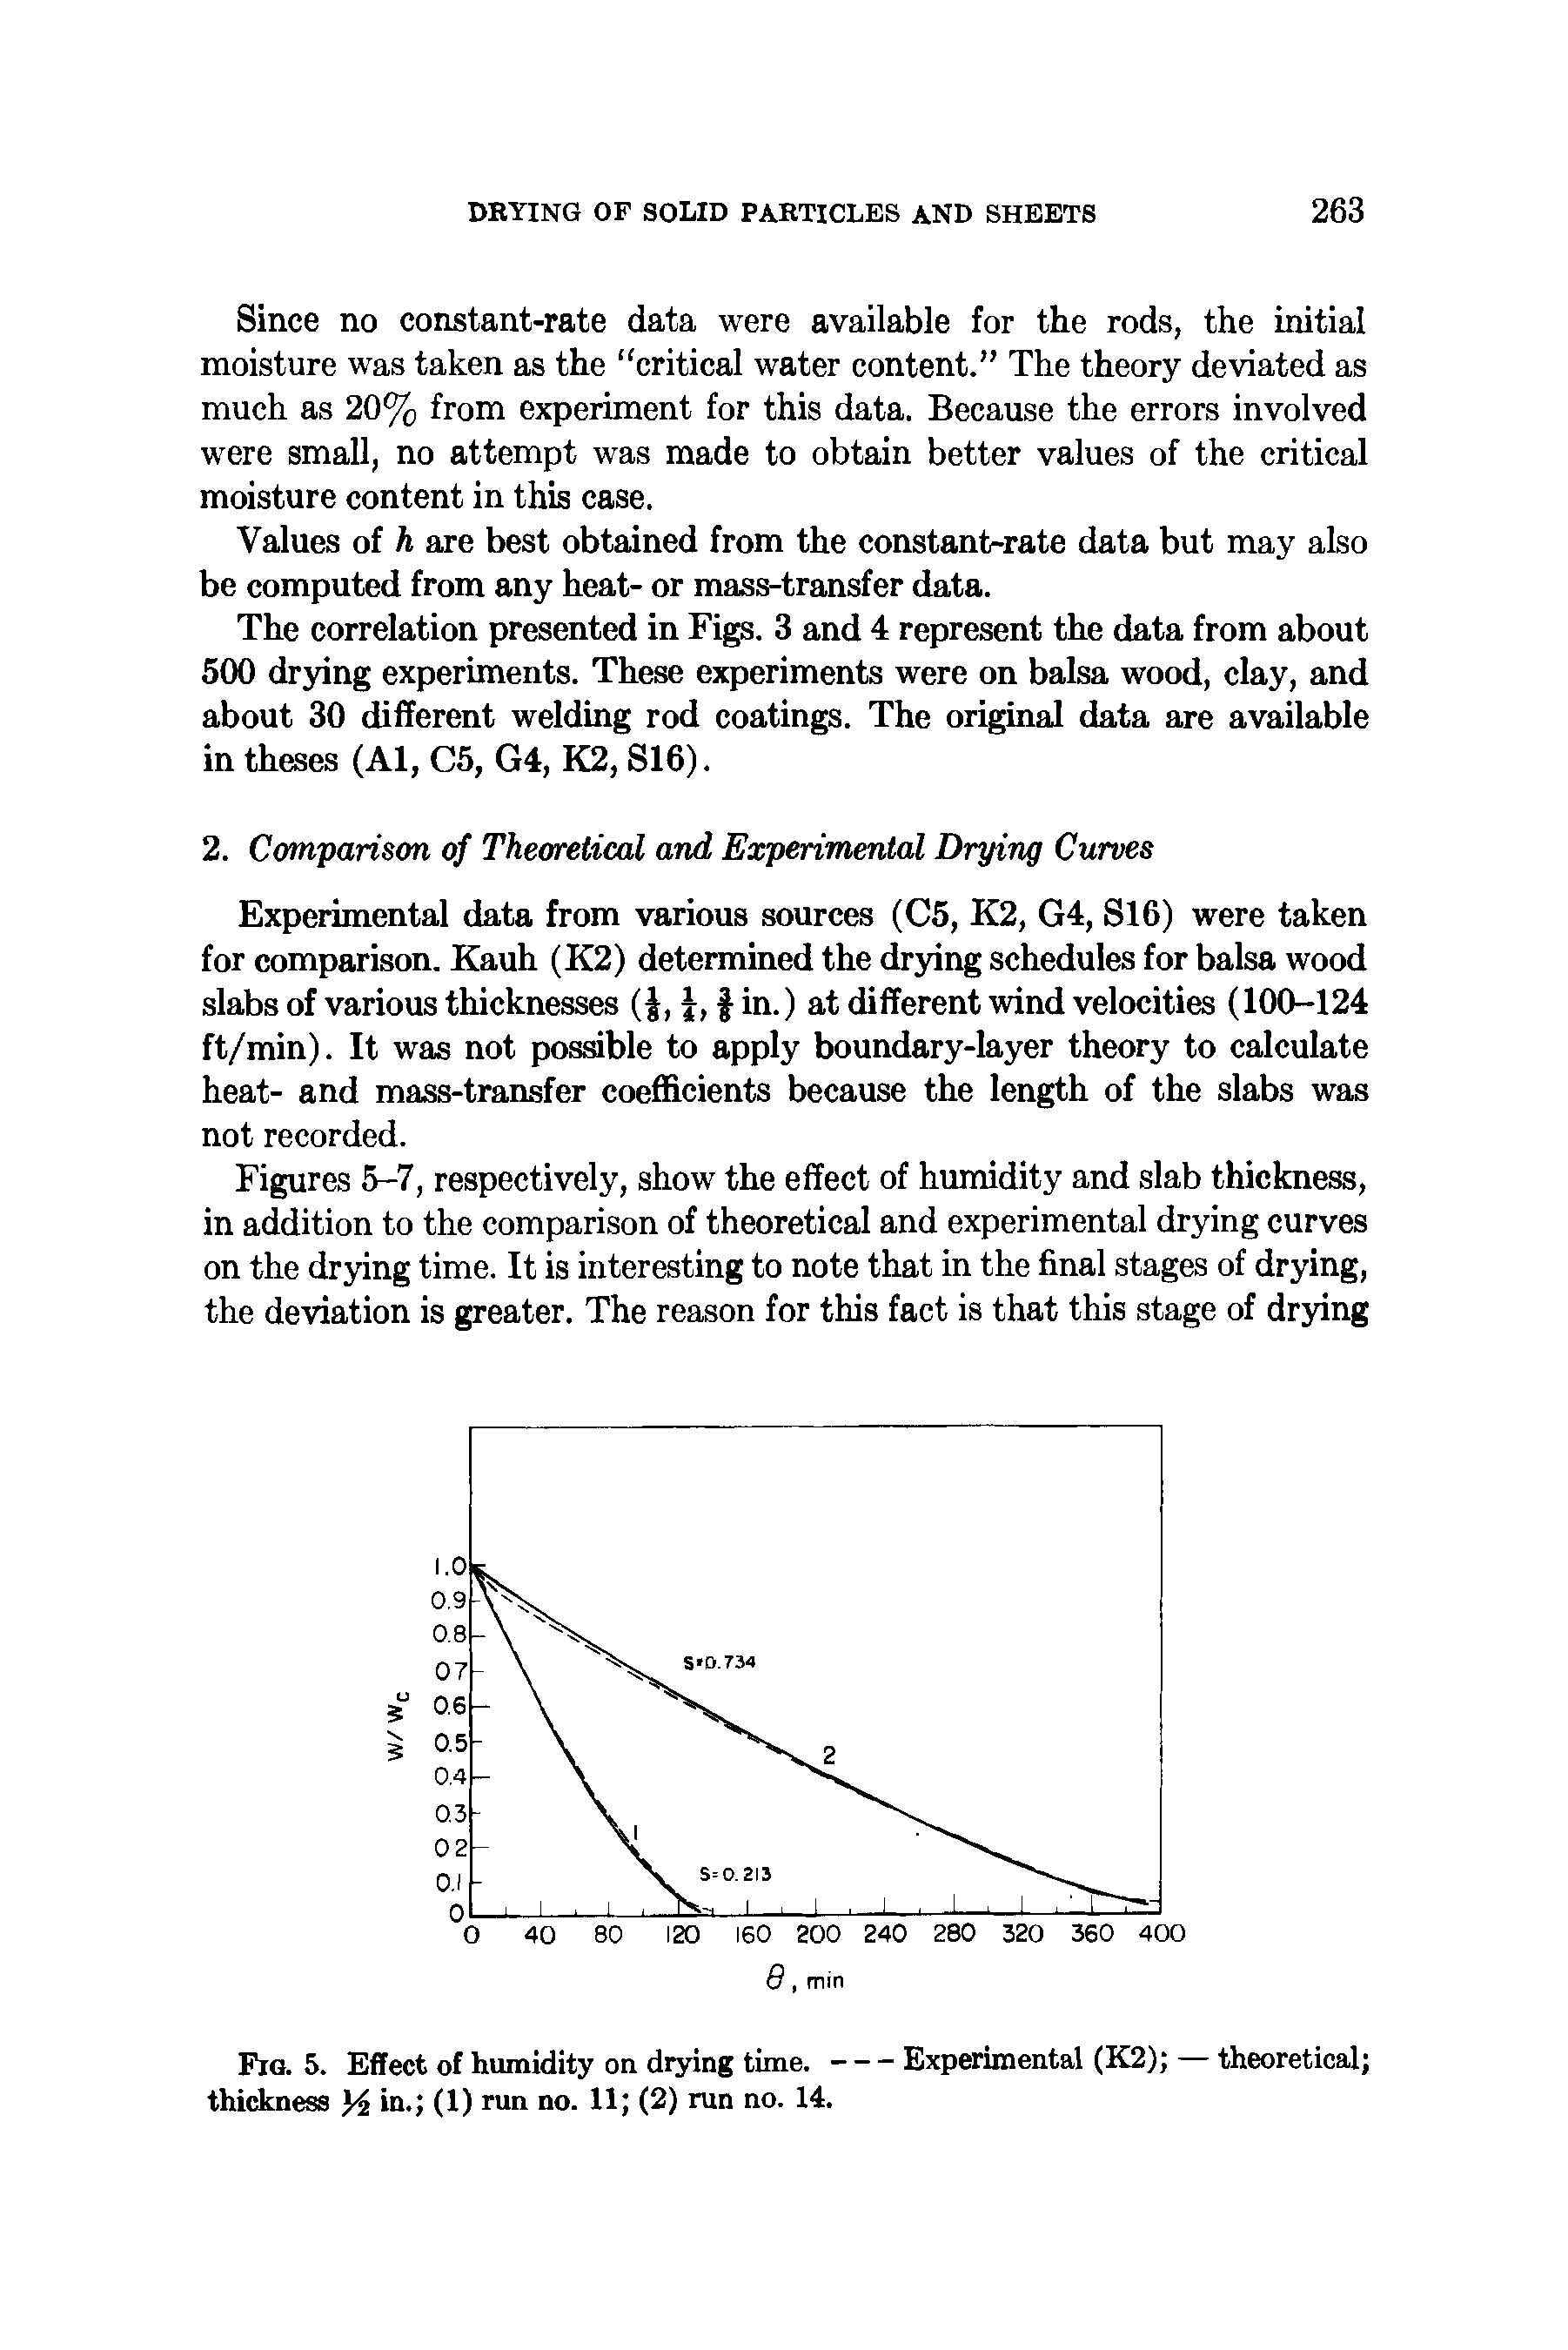 Figures 5-7, respectively, show the effect of humidity and slab thickness, in addition to the comparison of theoretical and experimental drying curves on the drying time. It is interesting to note that in the final stages of drying, the deviation is greater. The reason for this fact is that this stage of drying...